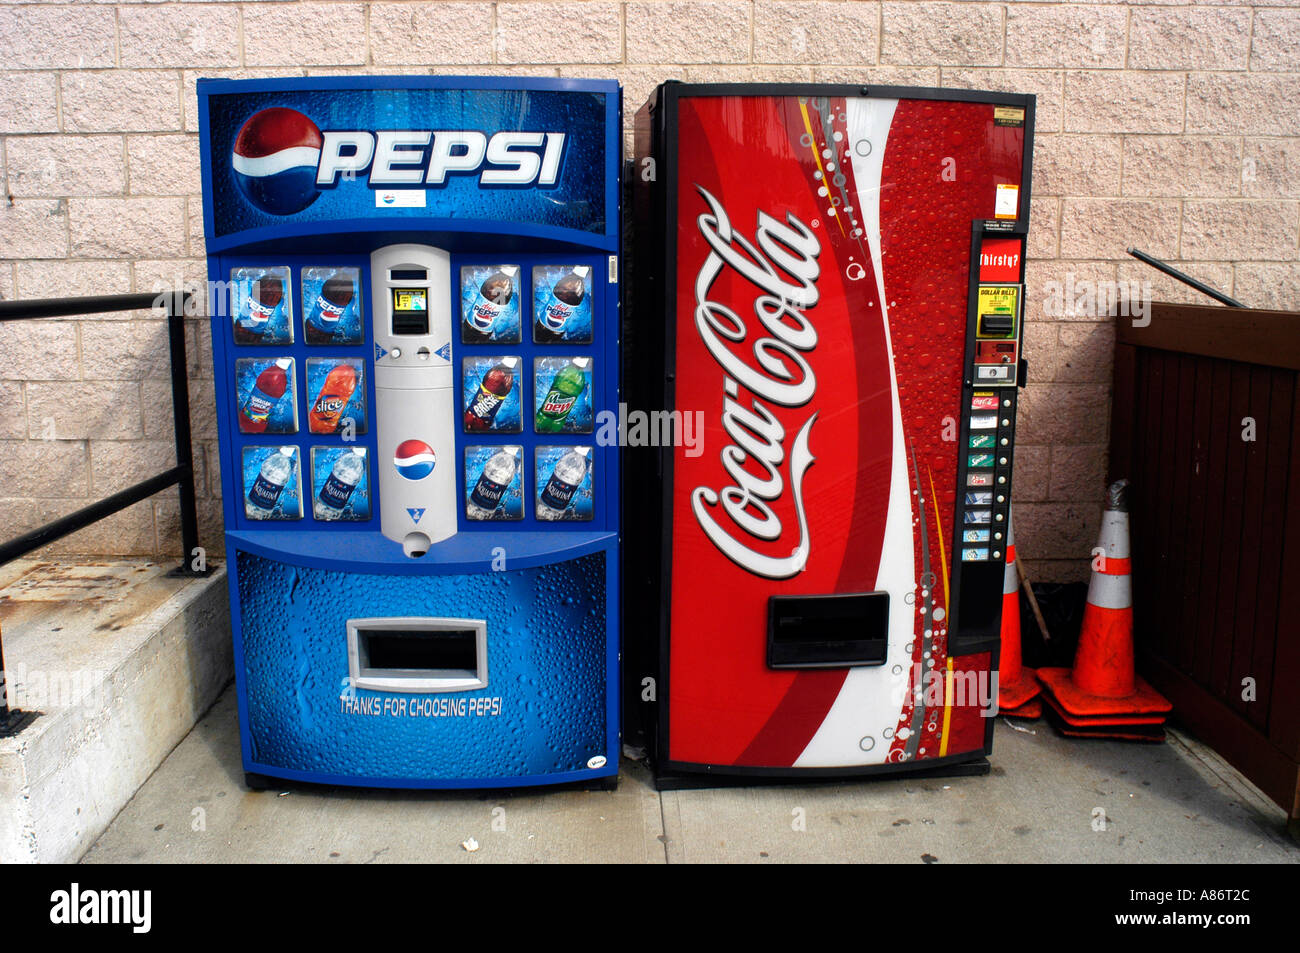 Pepsi Cola and Coca Cola vending machines side by side Stock Photo